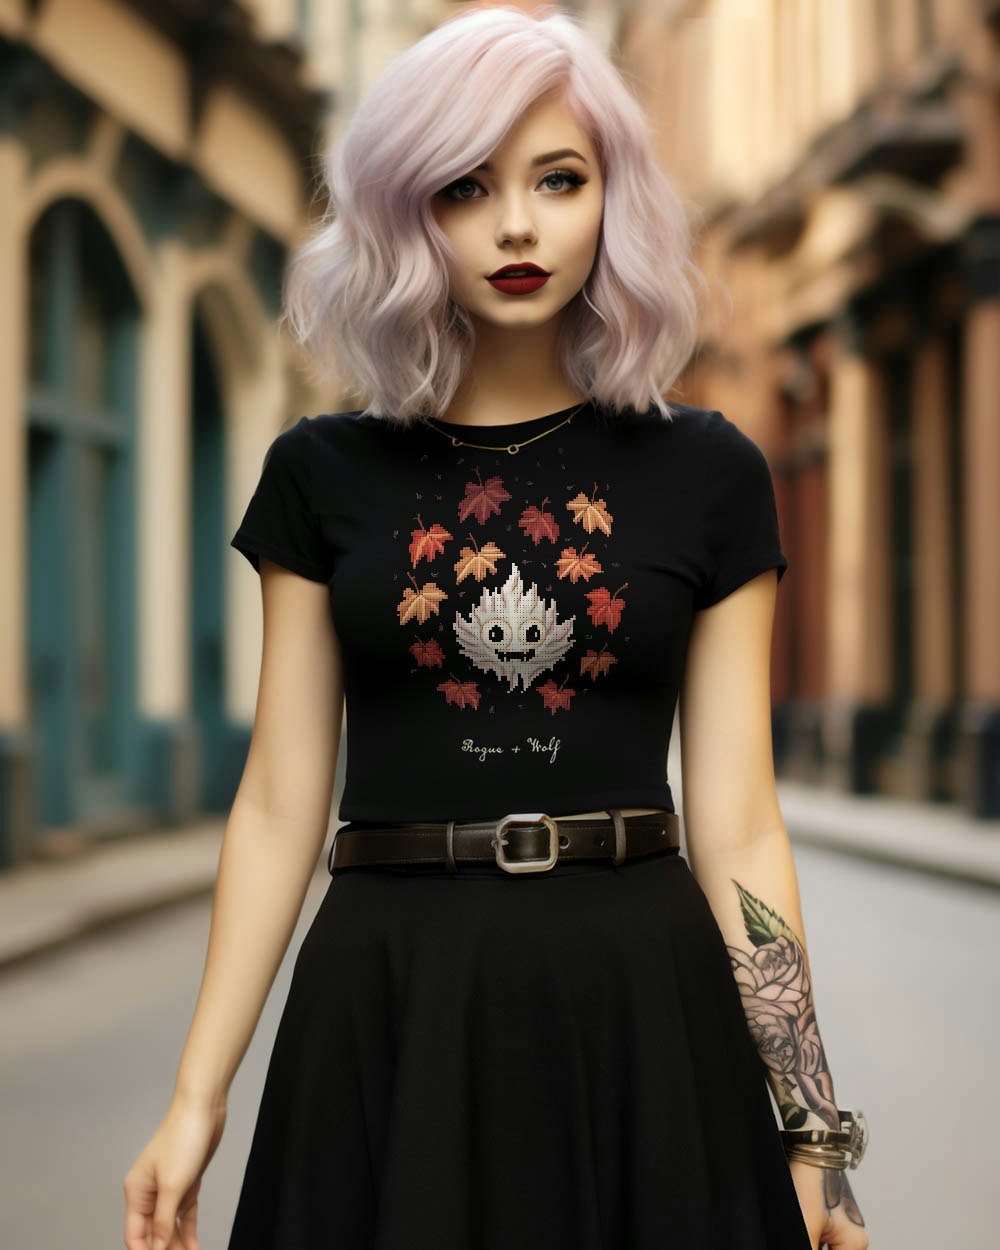 Maple Ghosty Short Sleeve Crop Top - Dark Academia Spooky Ghost Tee, Witchy Gothic Occult Vegan Fashion, Xmas Goth Gifts